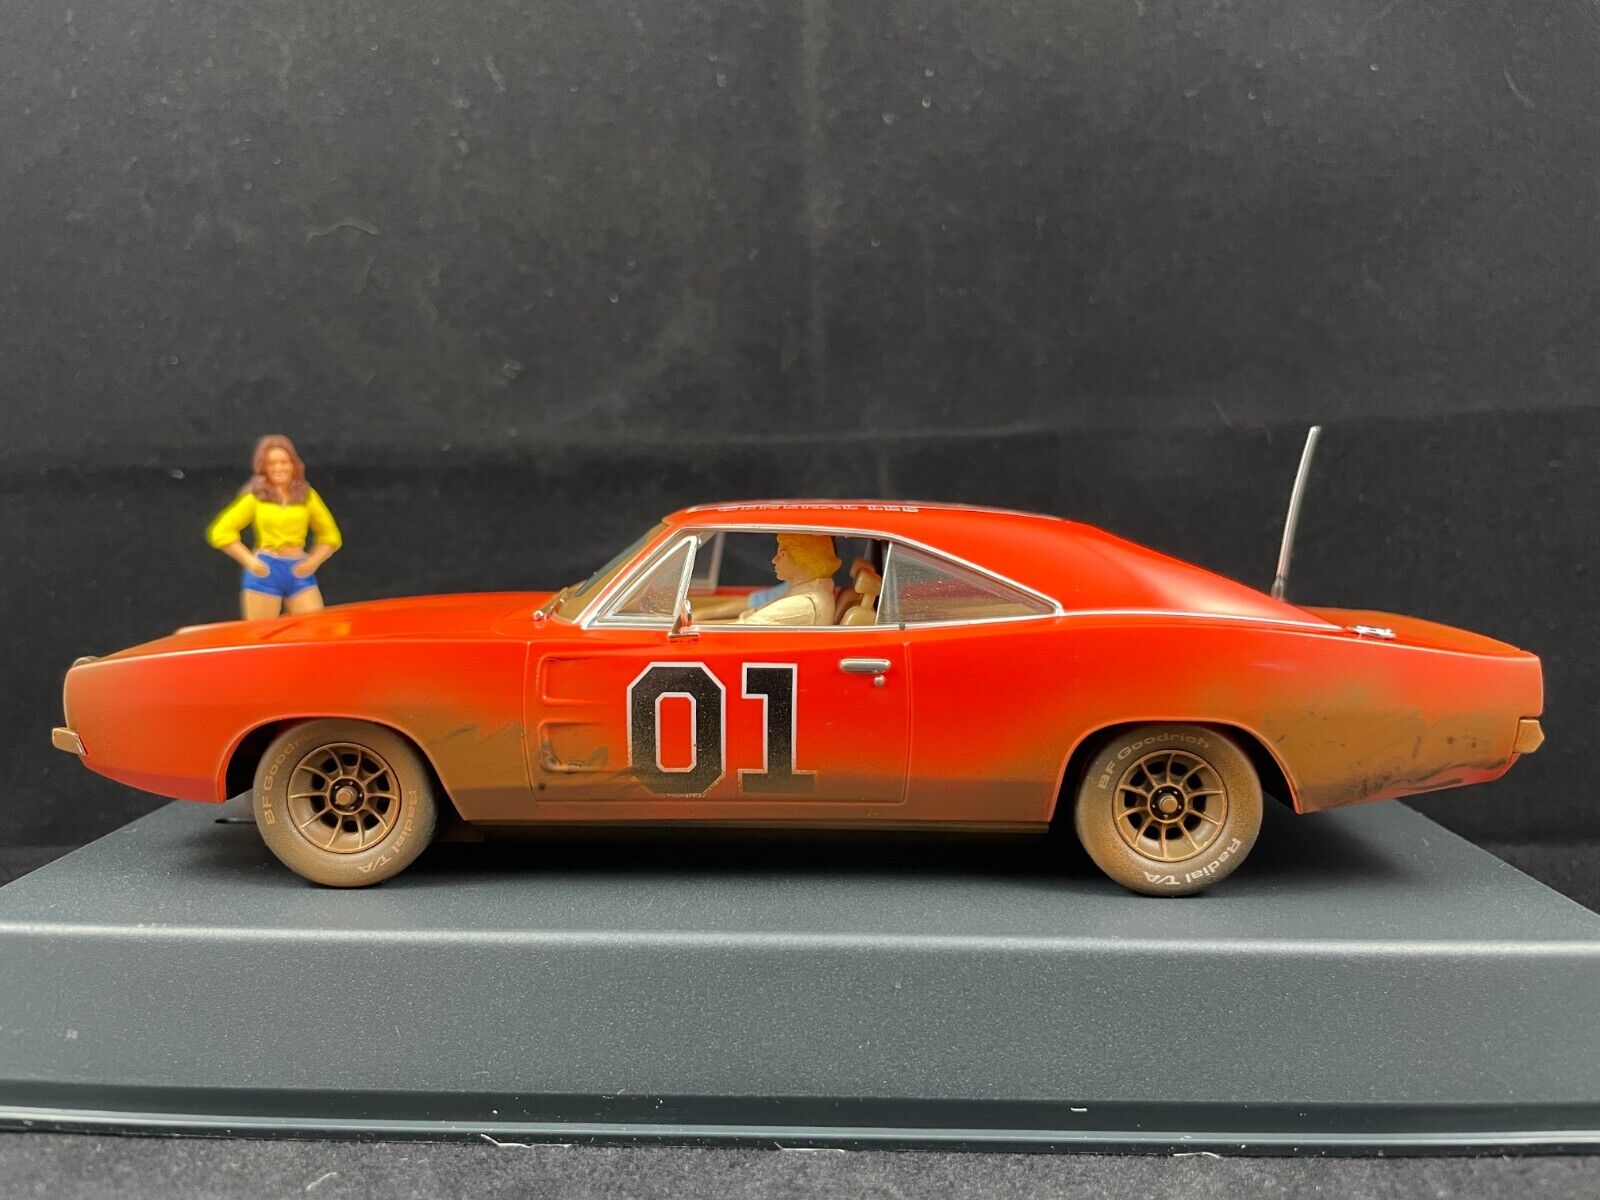 P158 PIONEER GENERAL LEE DODGE CHARGER DIRTY VERSION 1:32 SCALE SLOT CAR -  Bonza Slot Cars and Hobbies